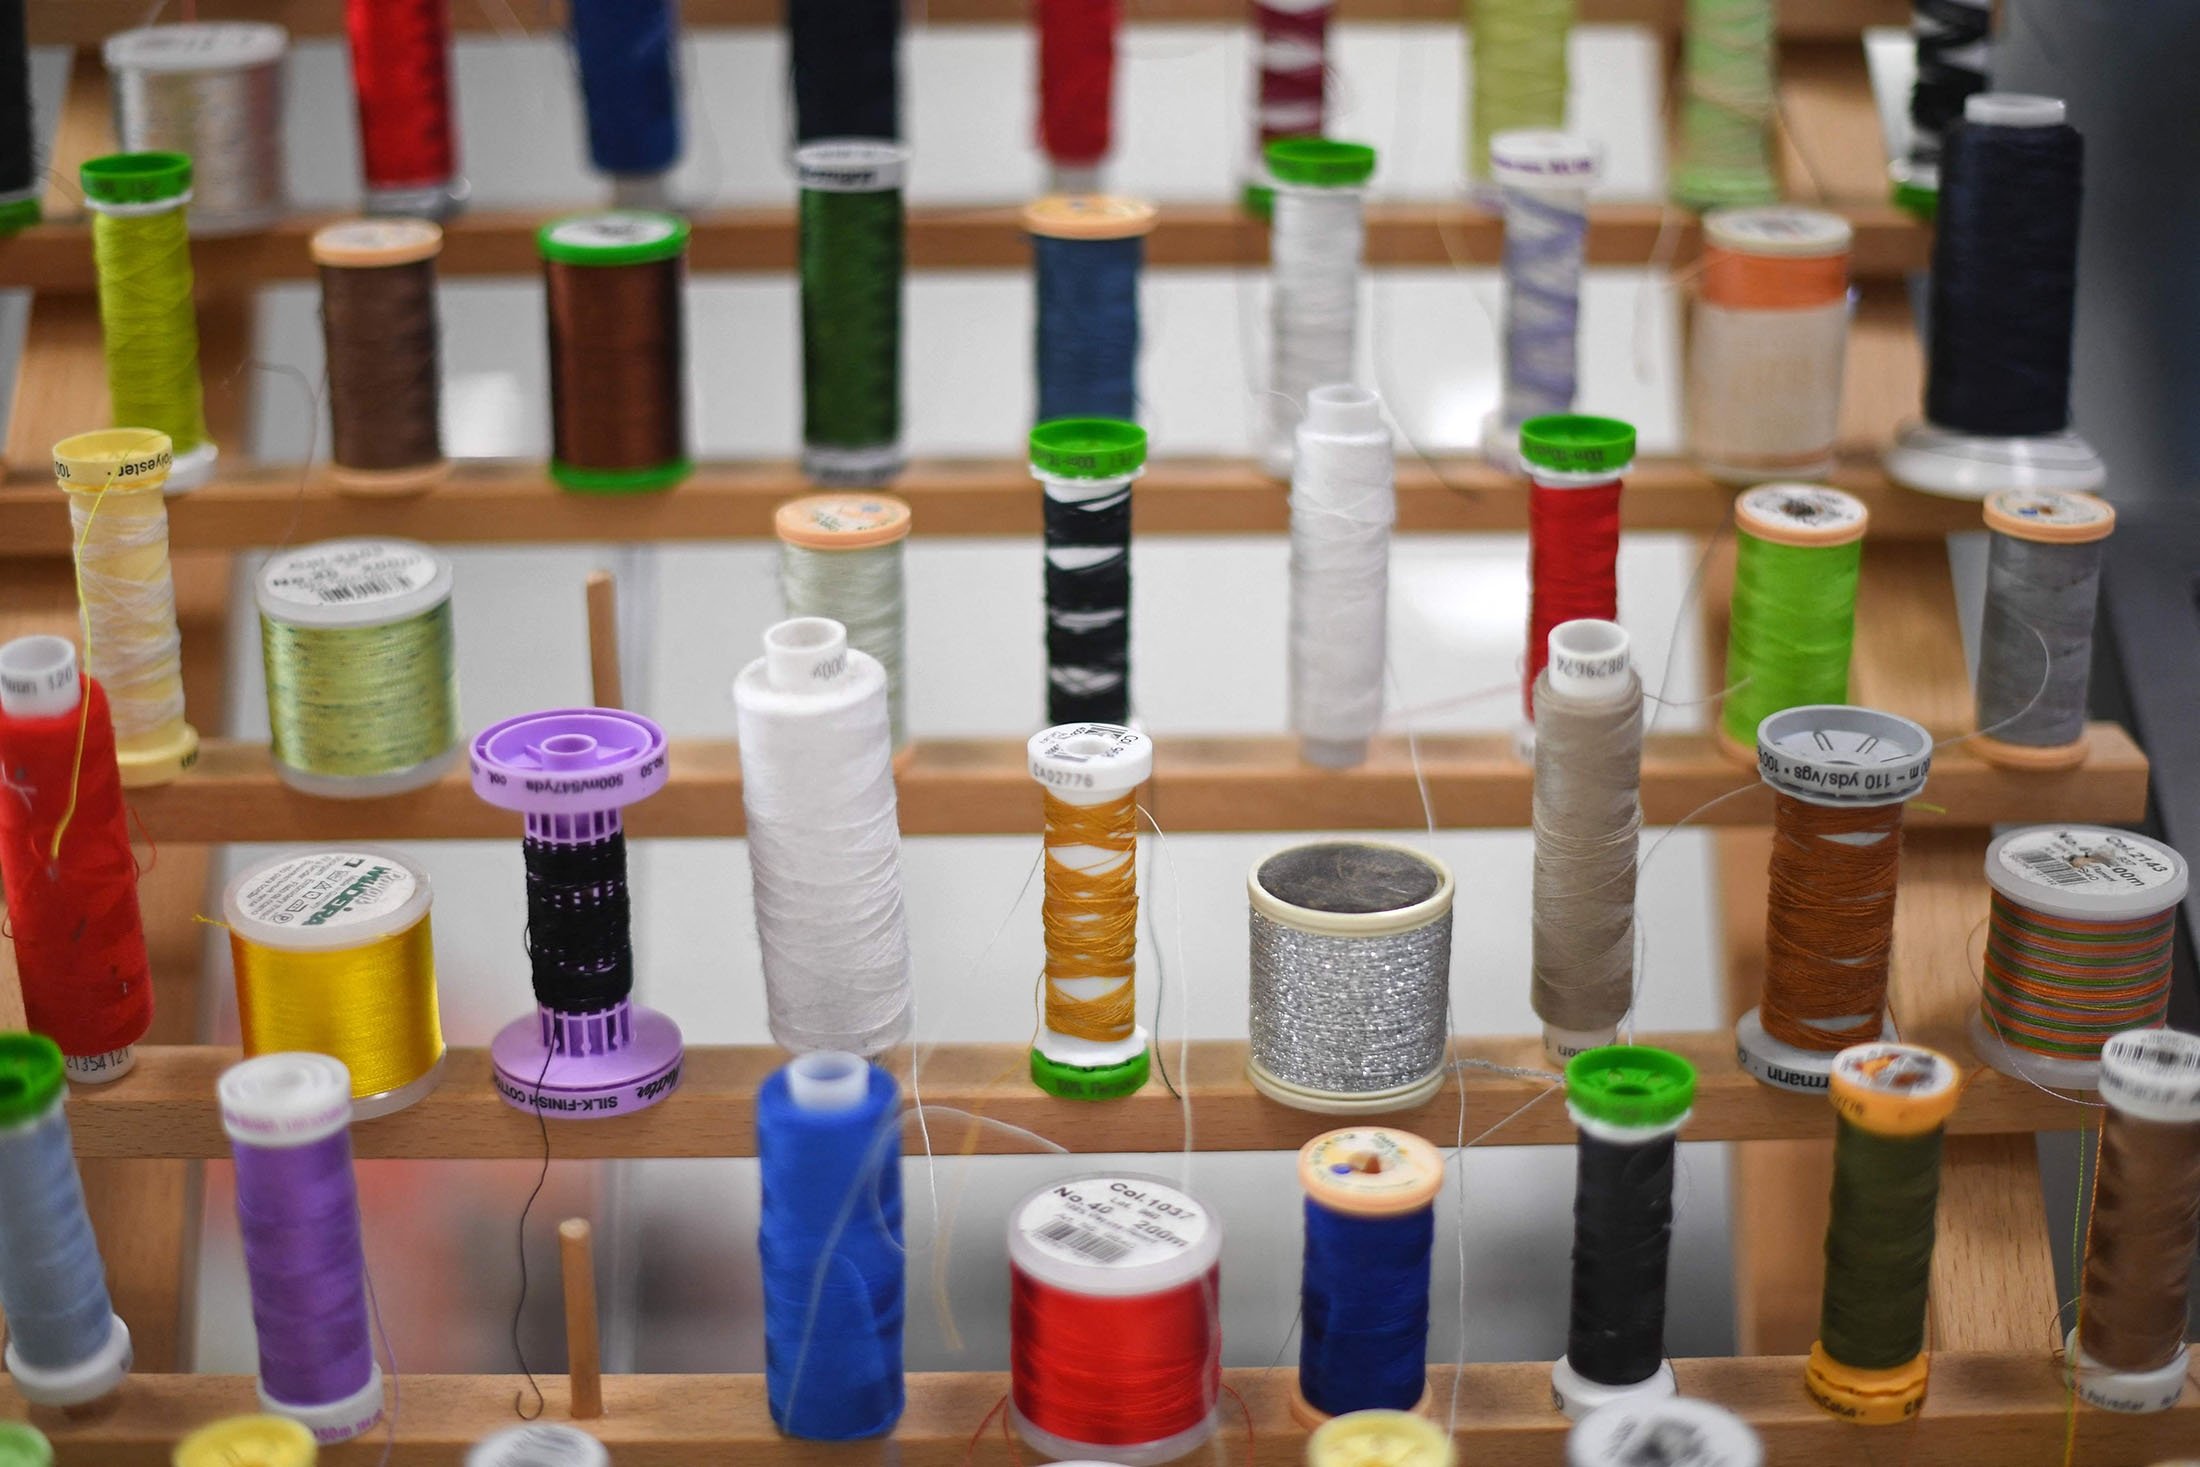 Thread rolls displayed at The New Craft House, a sewing workshop studio and designer deadstock fabric shop, in Hackney, East London, U.K., Feb. 11, 2022. (AFP Photo)